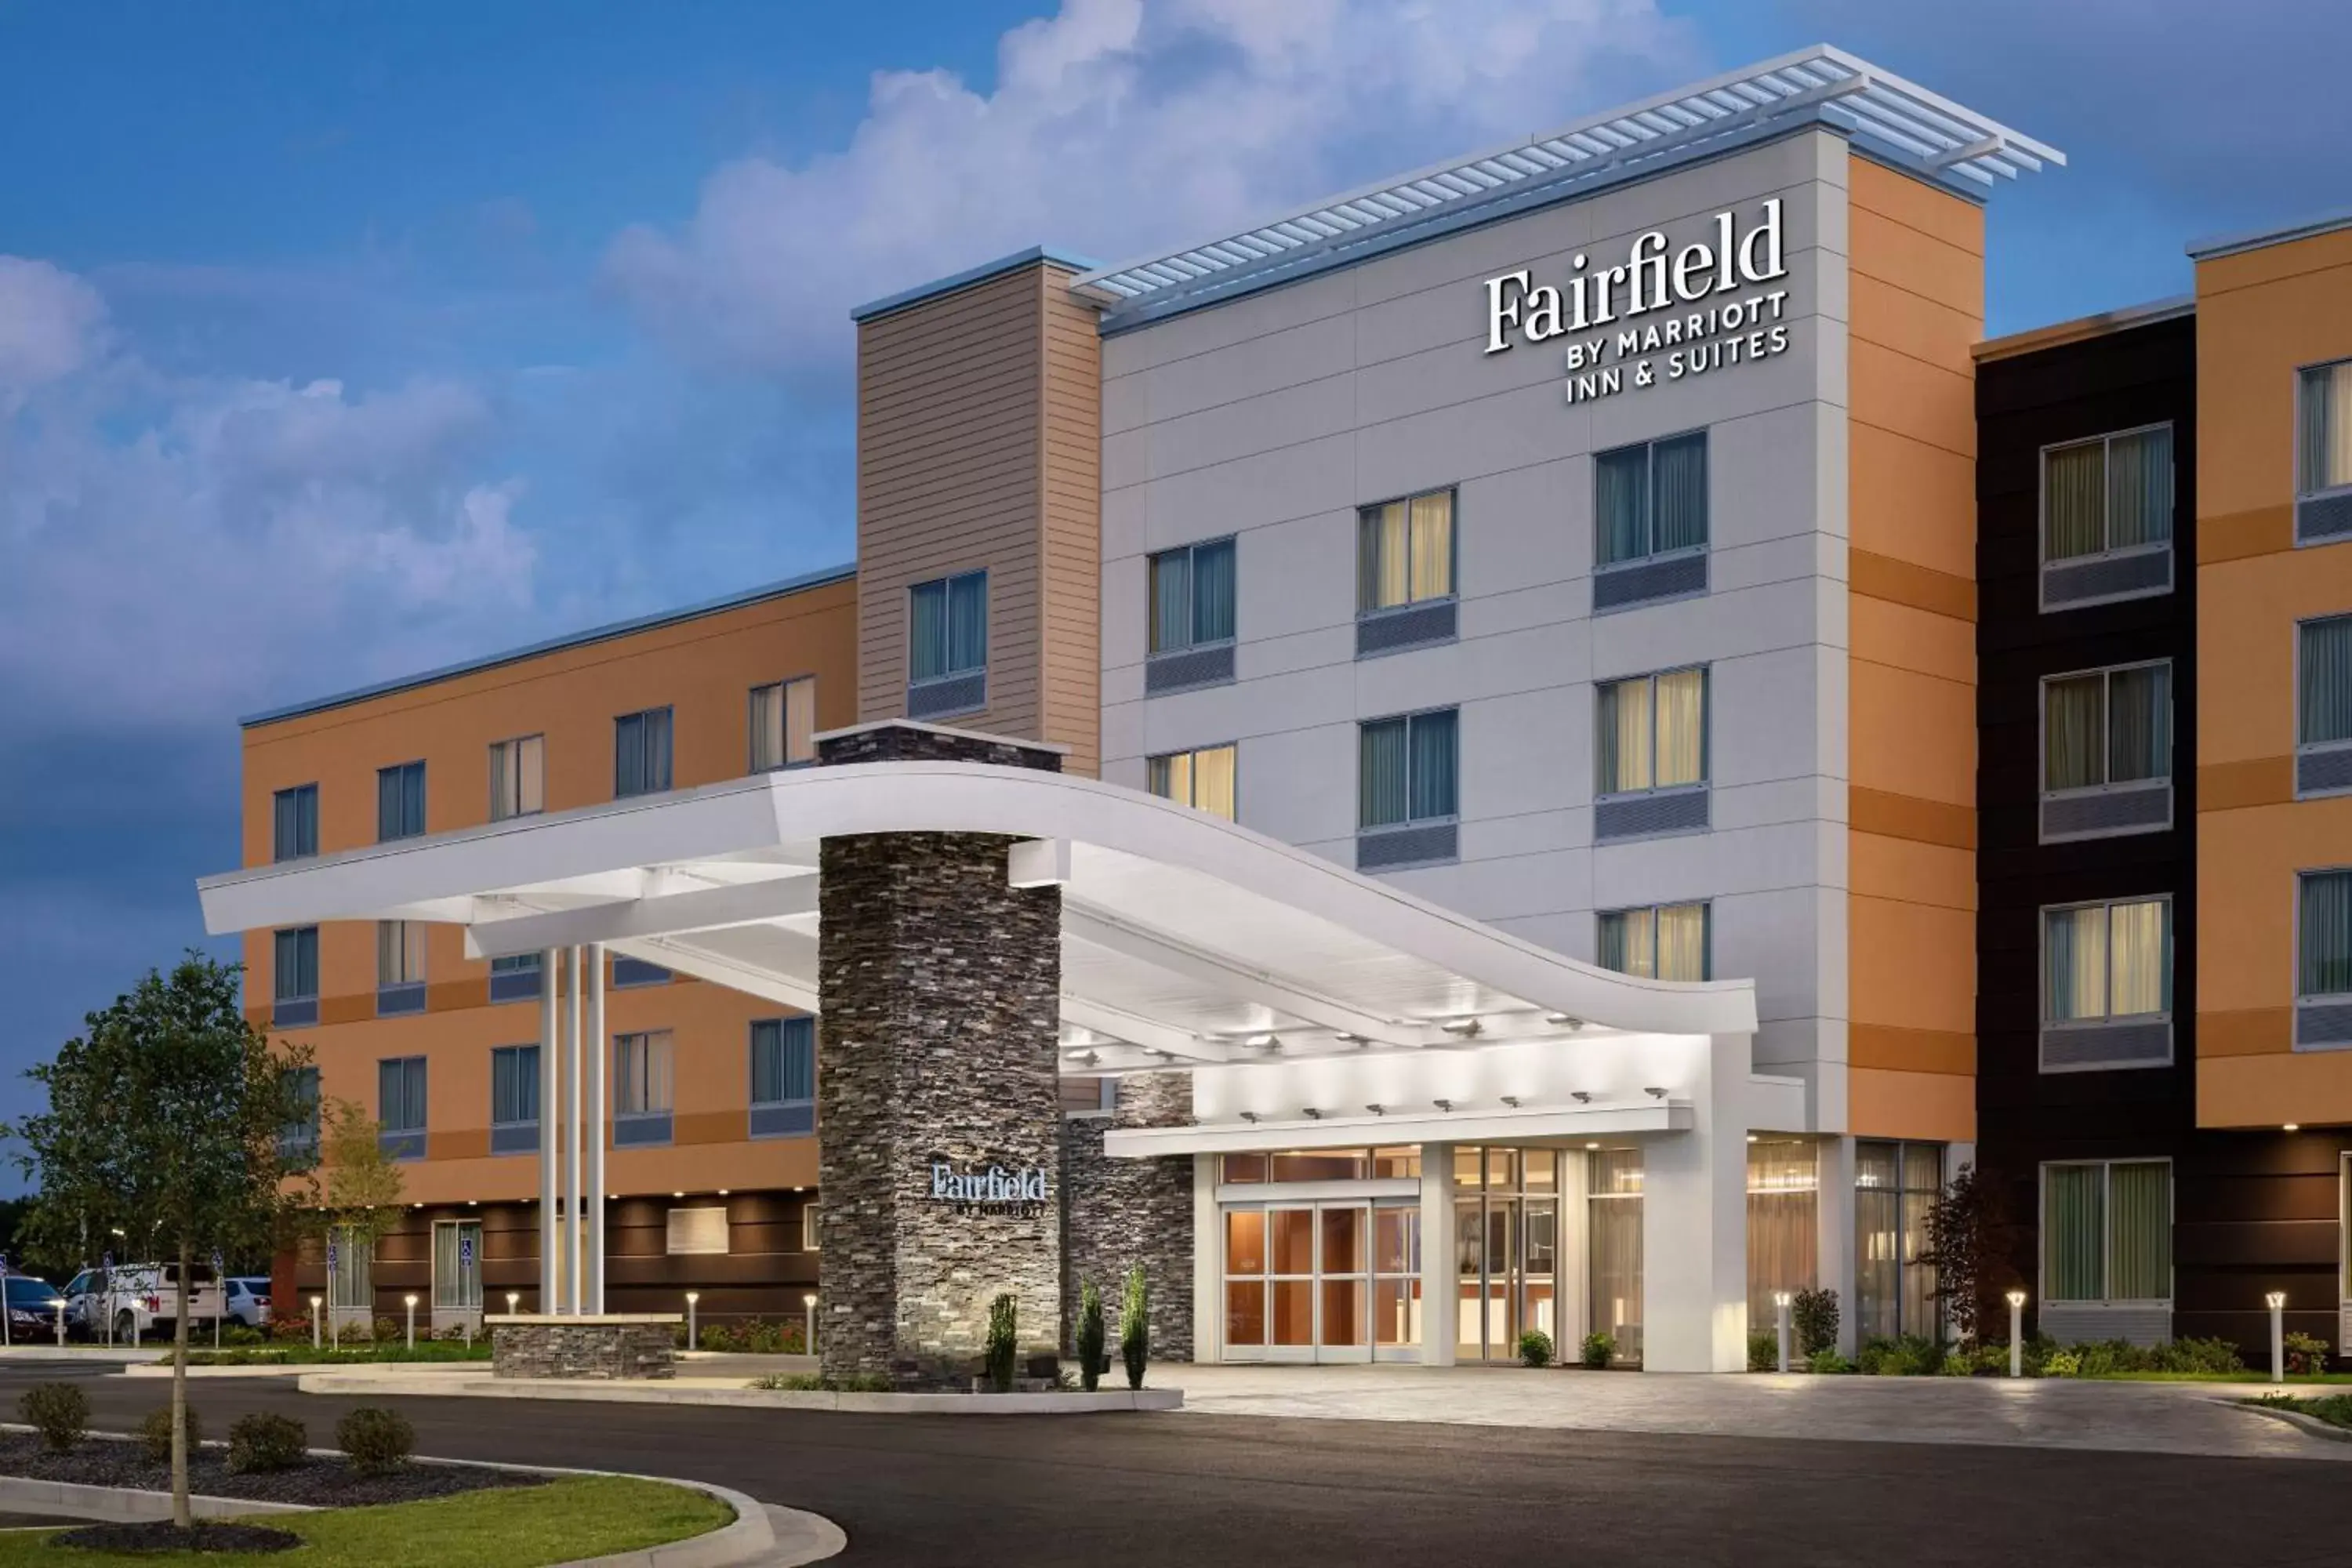 Property Building in Fairfield by Marriott Inn and Suites O Fallon IL